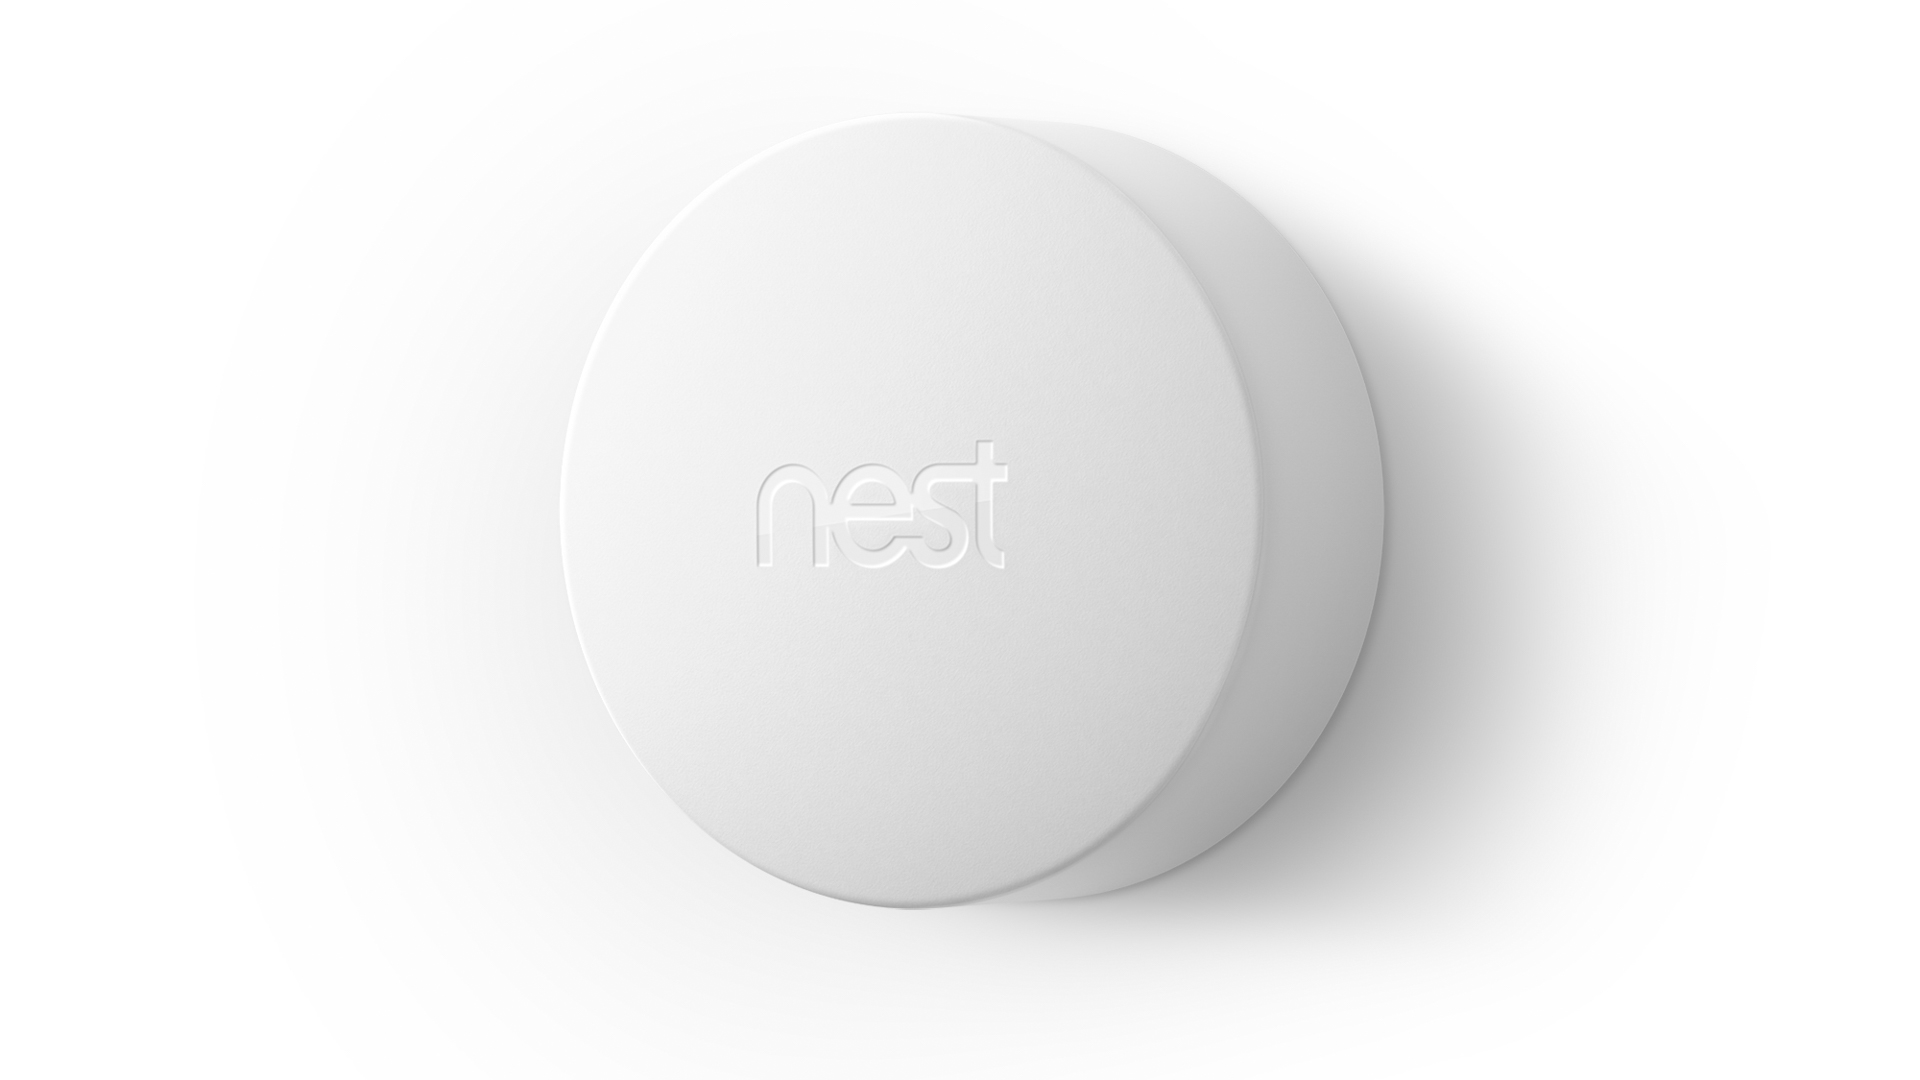 Measuring a diminutive 1.9 inches in dismater, the Nest Temperature Sensor is entirely wireless and adds remote temperature control to homes equipped with the 3rd-generation Nest Learning Thermostat or Nest Thermostat E. Image: Nest.